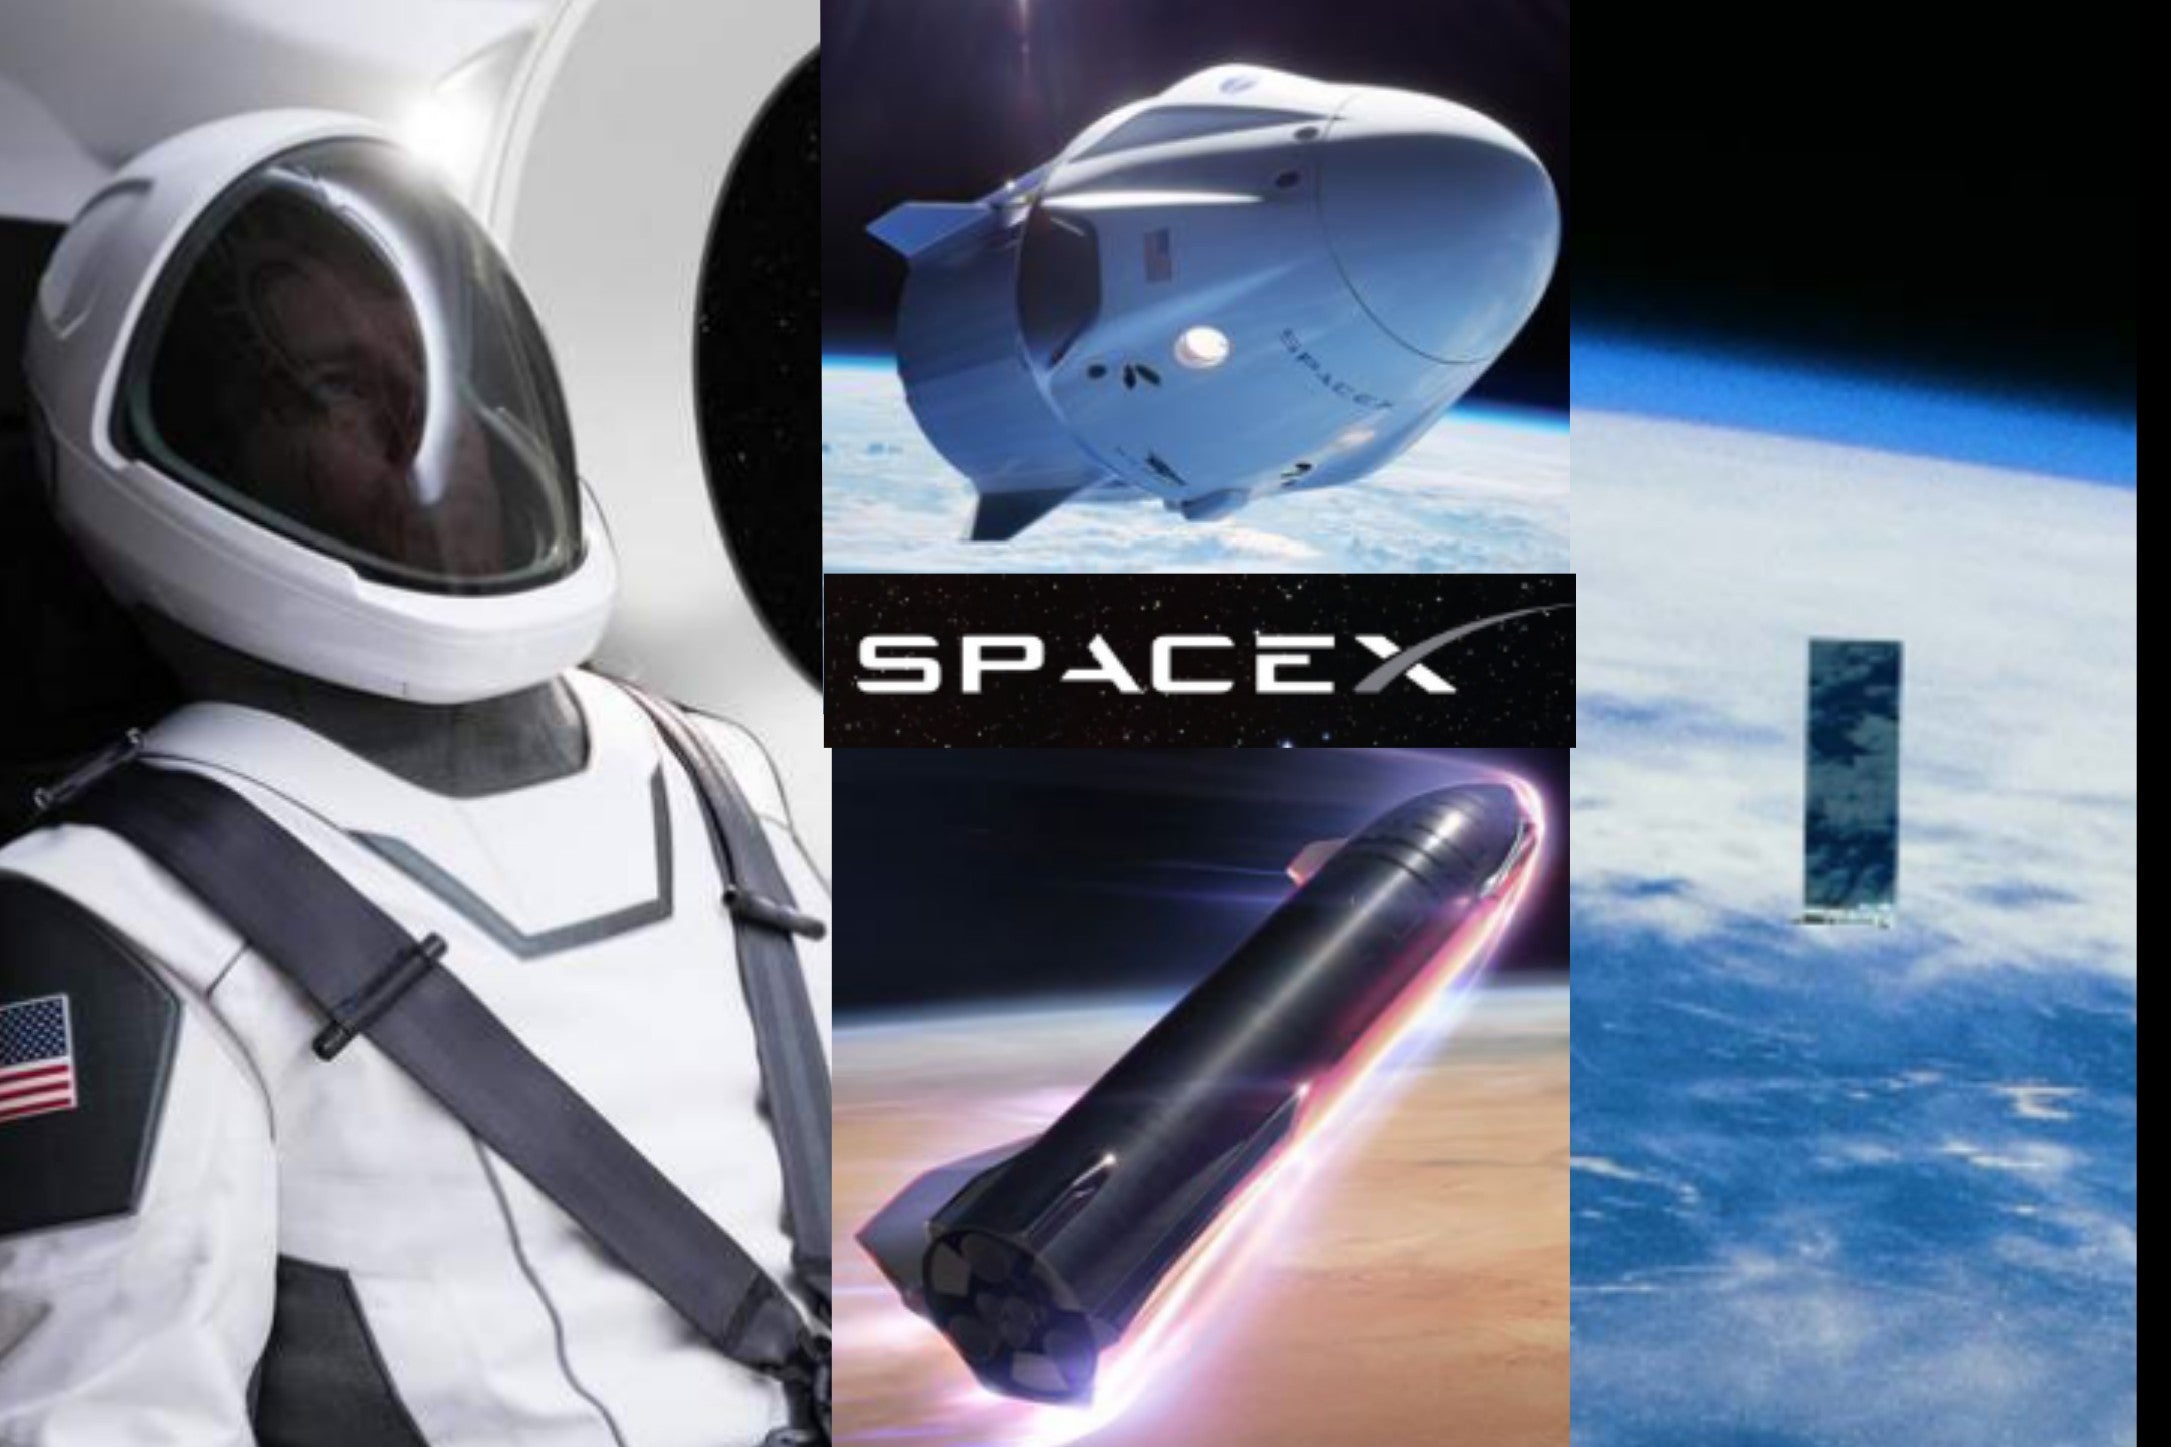 2020 will be a very exciting, active year for SpaceX